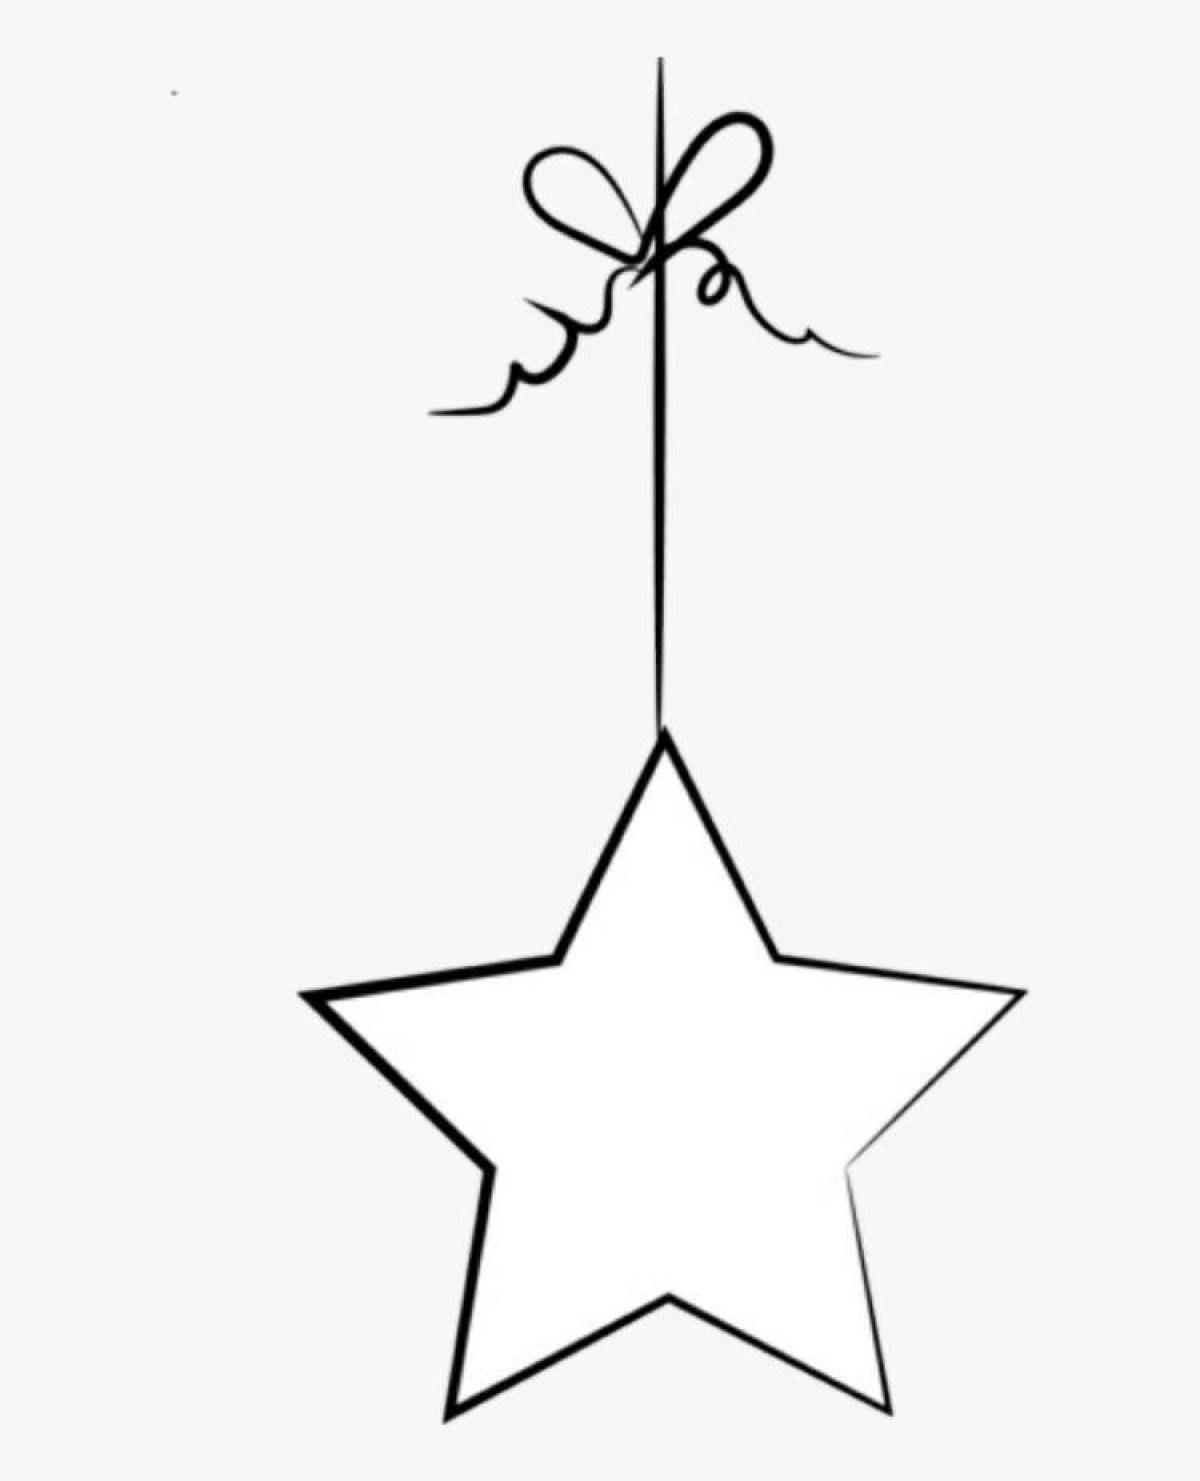 Coloring book dazzling Christmas star